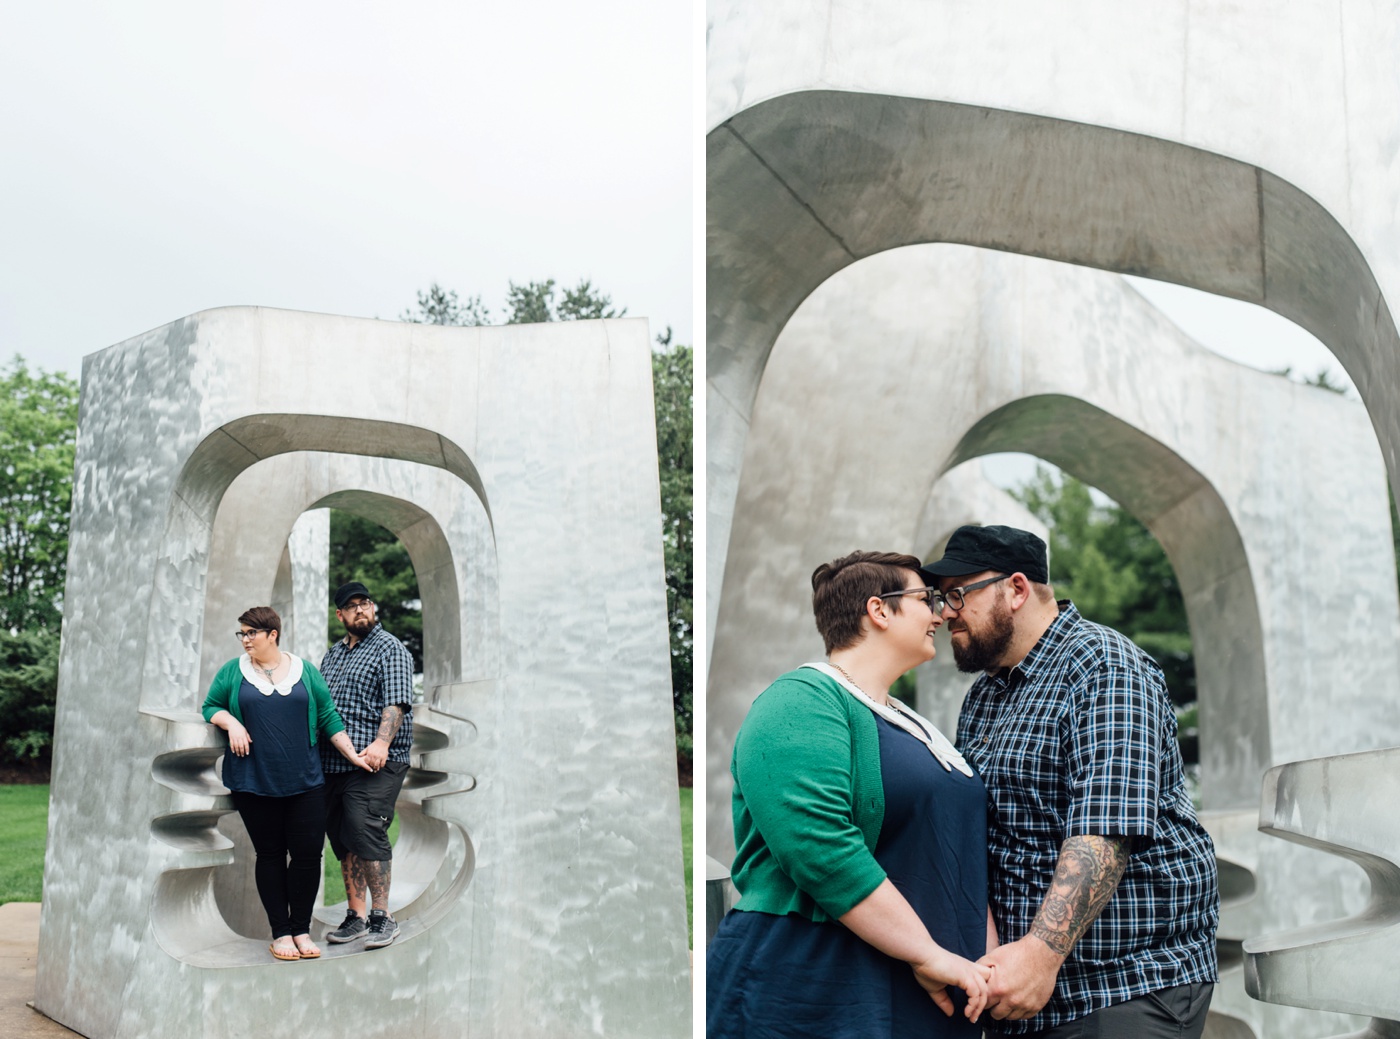 2 - Erin + Tim - Grounds for Sculpture - Hamilton New Jersey Engagement Session - Alison Dunn Photography